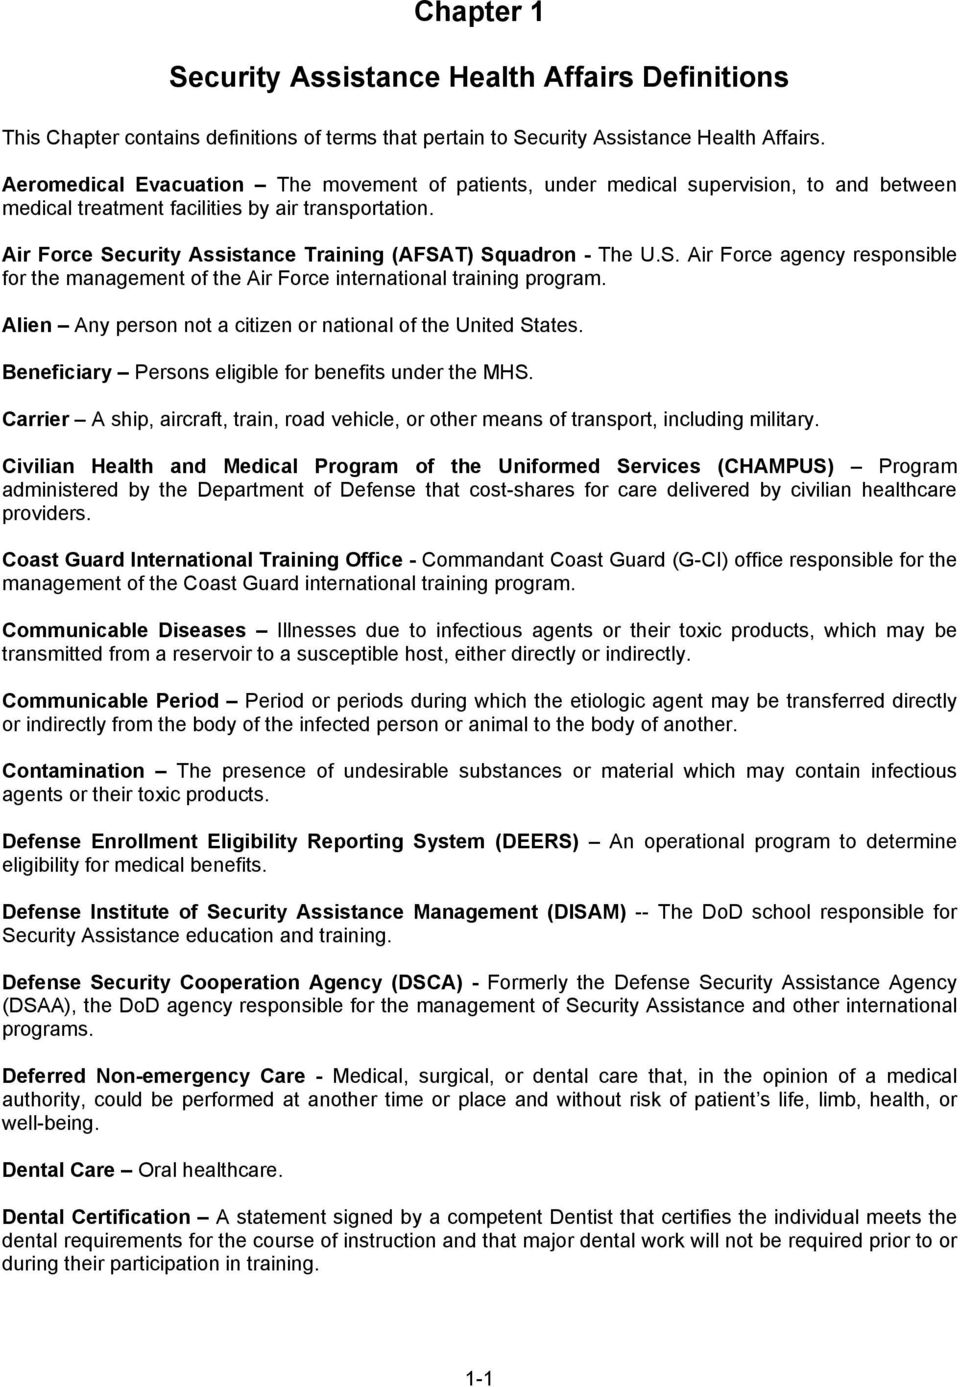 Air Force Security Assistance Training (AFSAT) Squadron - The U.S. Air Force agency responsible for the management of the Air Force international training program.